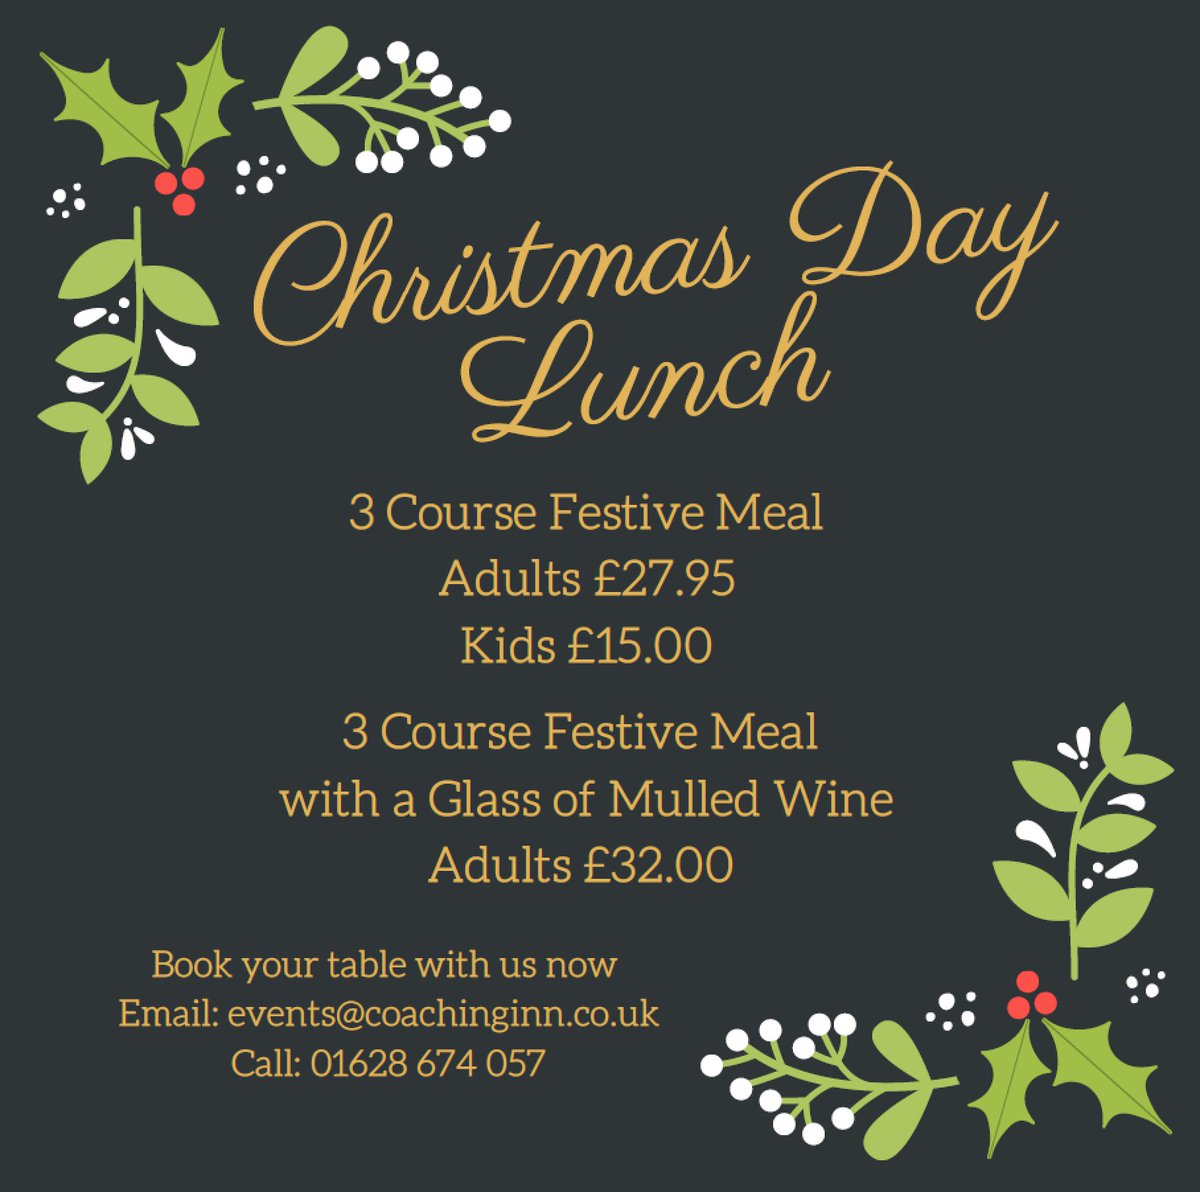 Christmas Day Lunch bookings @ThamesRiviera Hotel nestled beside the river at Maidenhead Bridge. Email:events@coachinginn.co.uk or call 01628 674057 #supportlocal #shoplocal  #community  #rbwmtogether